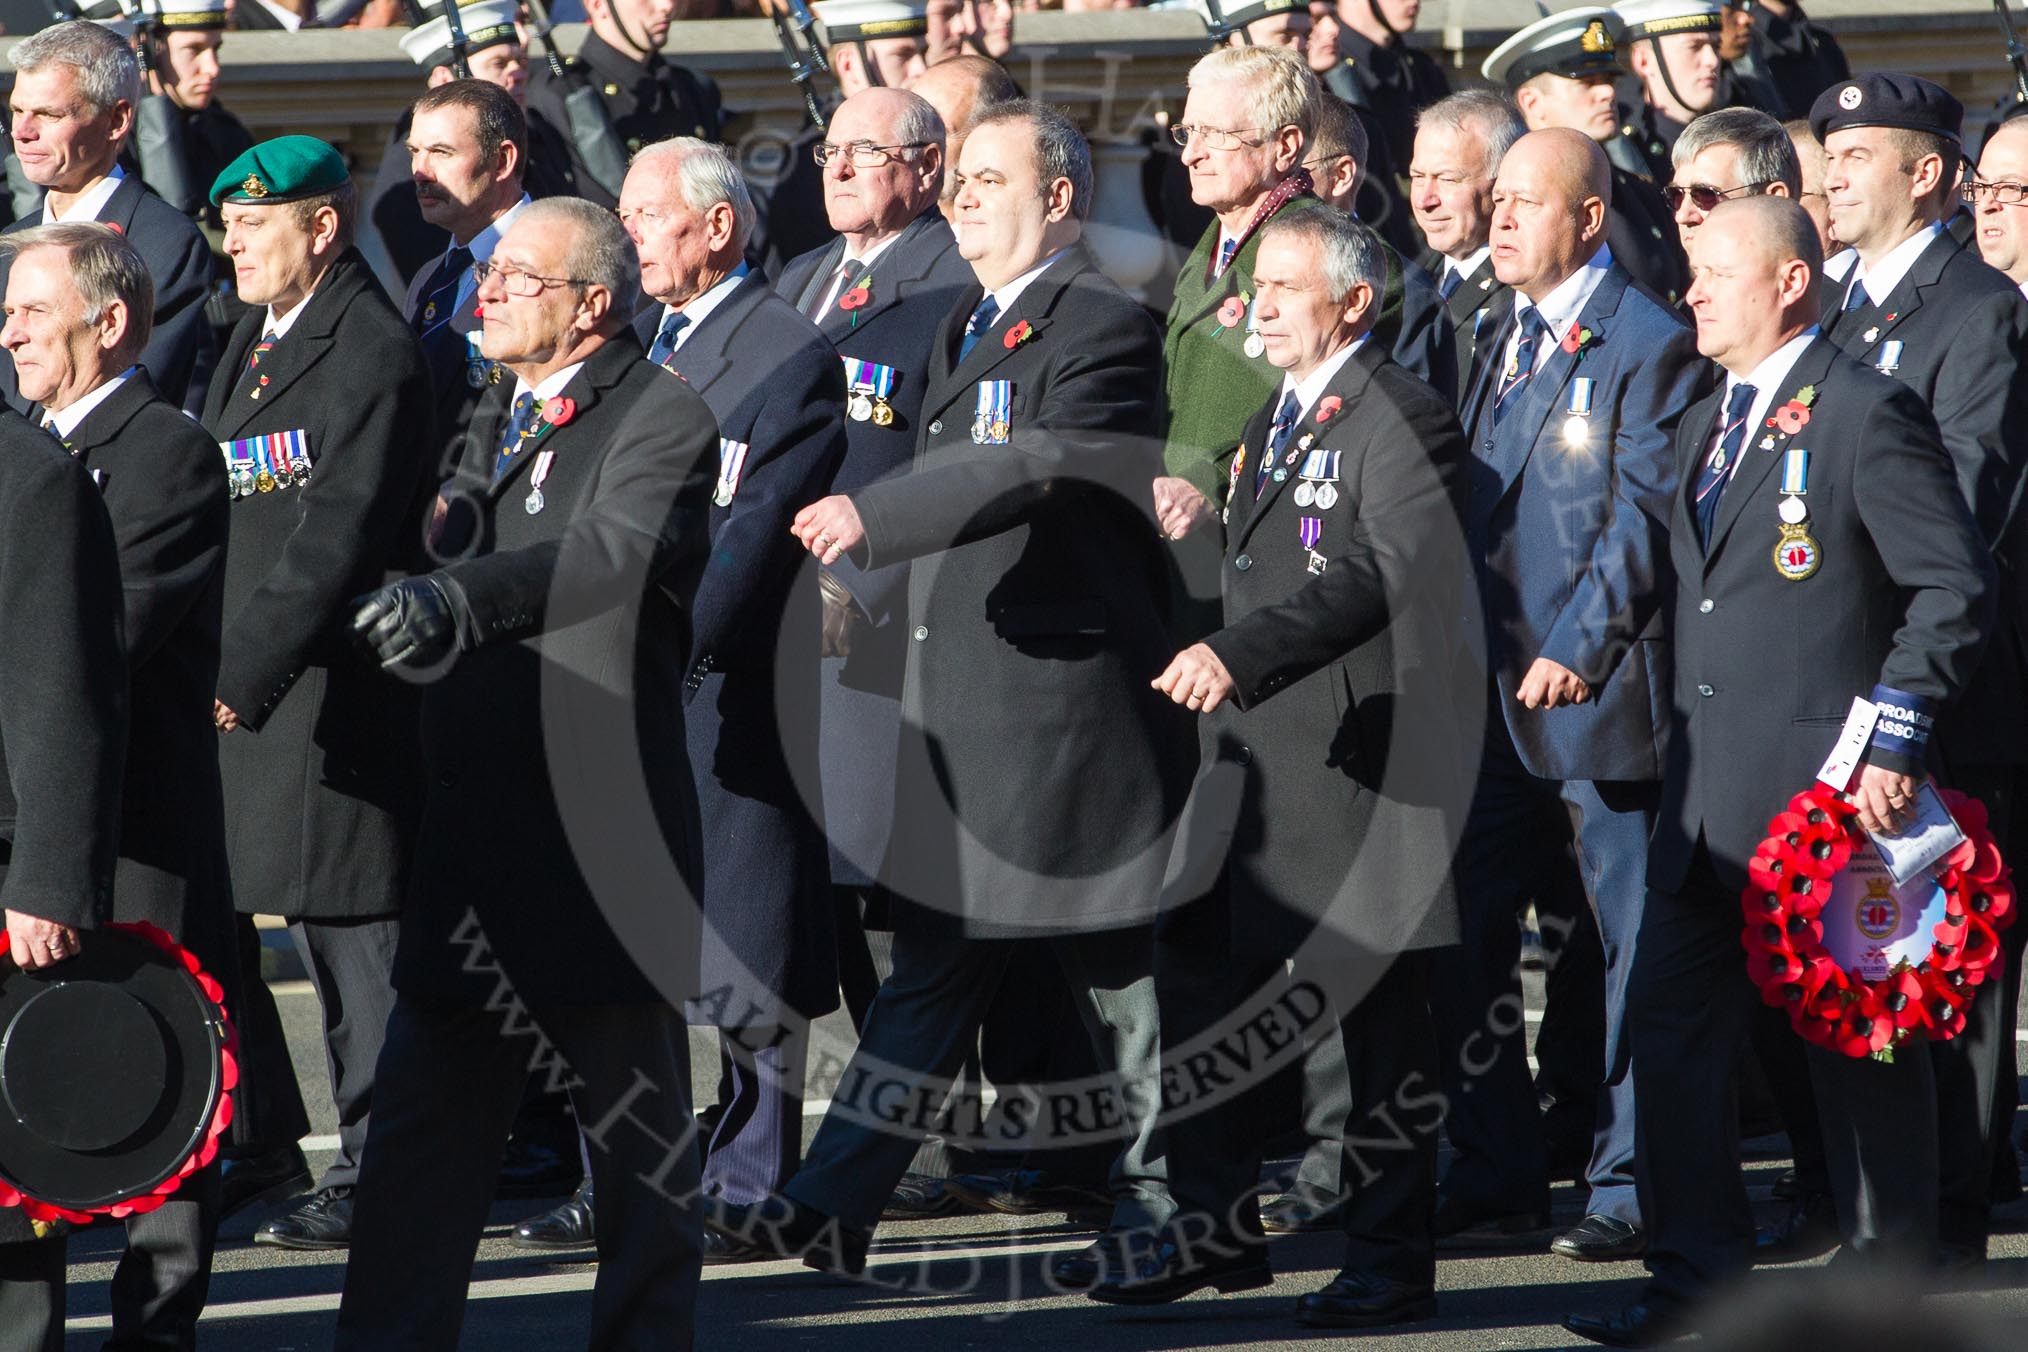 Remembrance Sunday 2012 Cenotaph March Past: Group E40 - Broadsword Association..
Whitehall, Cenotaph,
London SW1,

United Kingdom,
on 11 November 2012 at 11:42, image #286